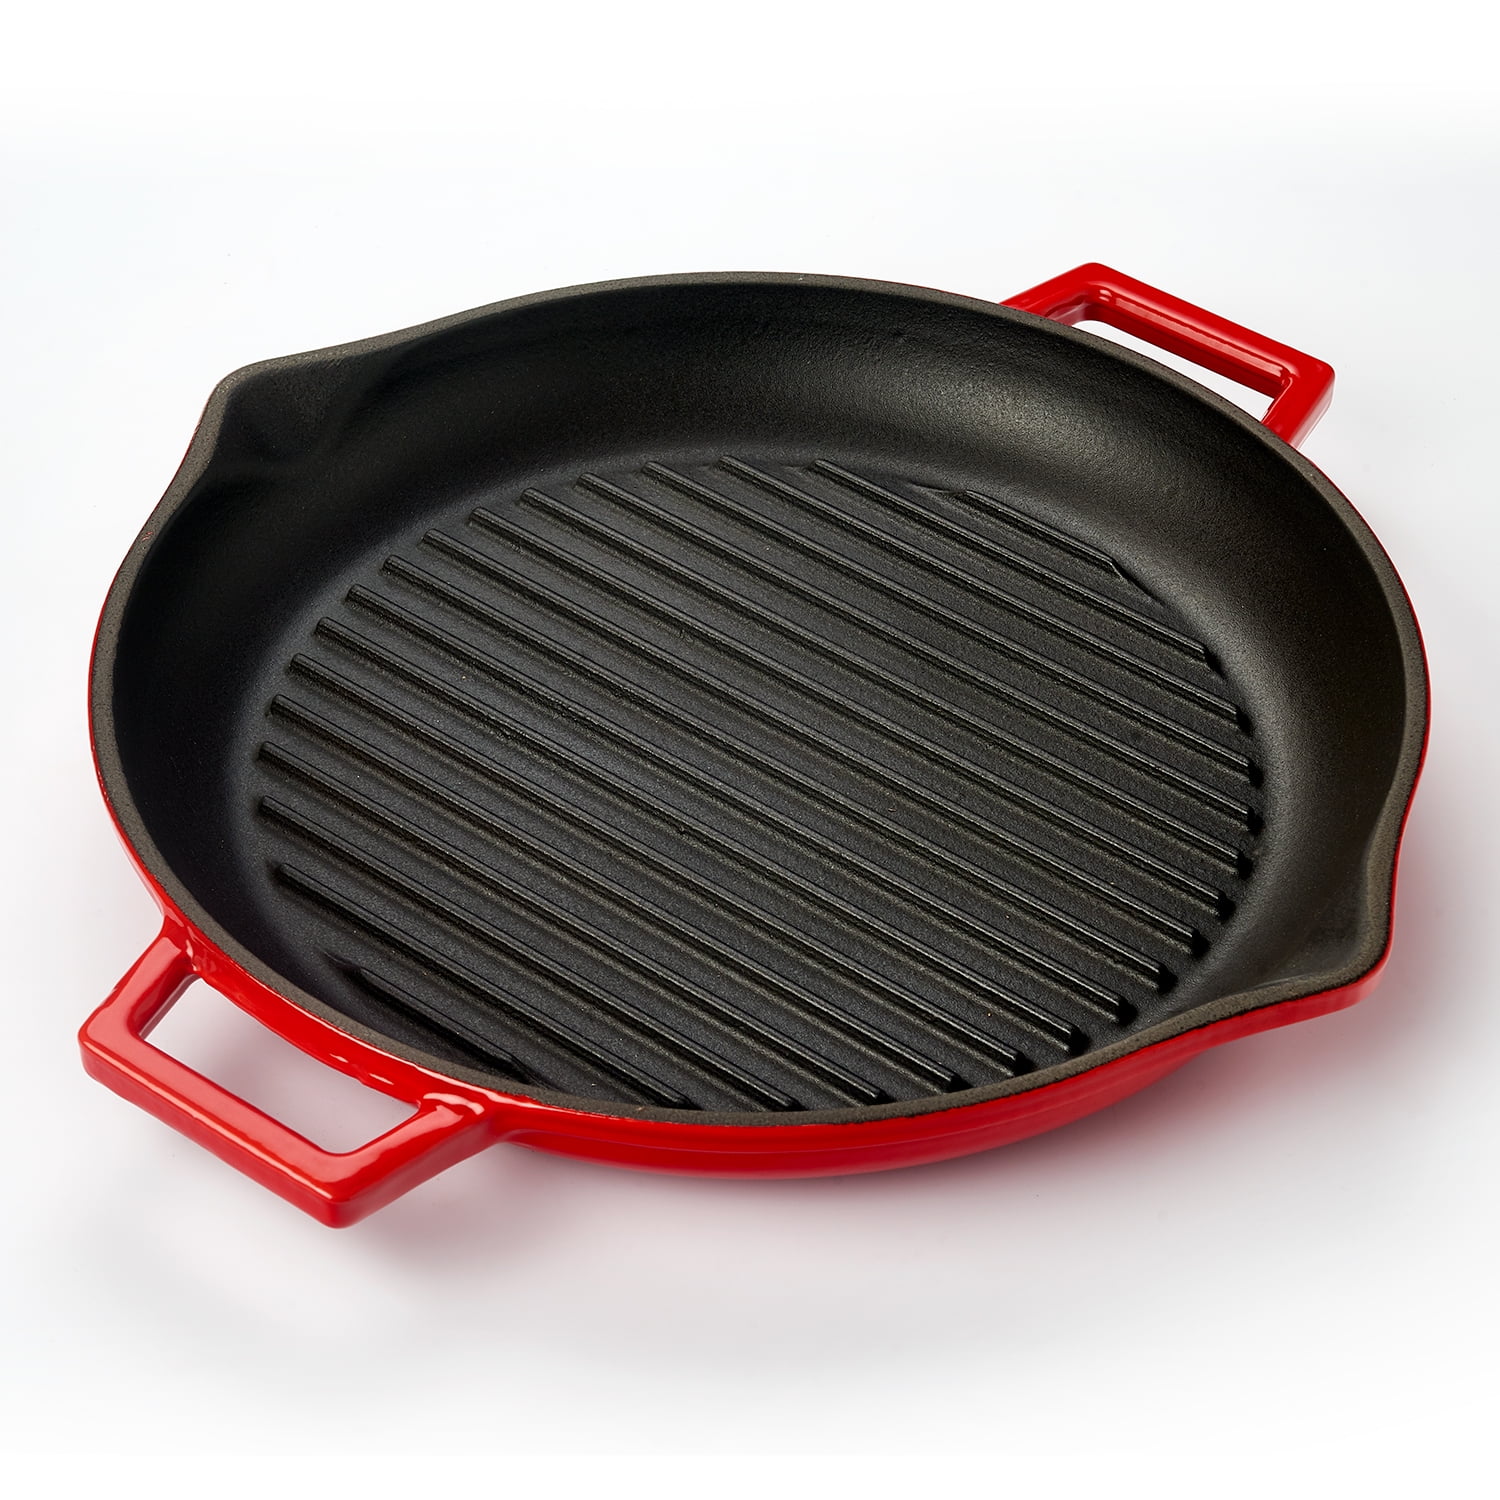 Country Living Enameled Cast Iron Square Griddle Grill Pan with Ridges, Helper Handle and Pouring Spouts for Easy Draining, Indoor Grilling Skillet